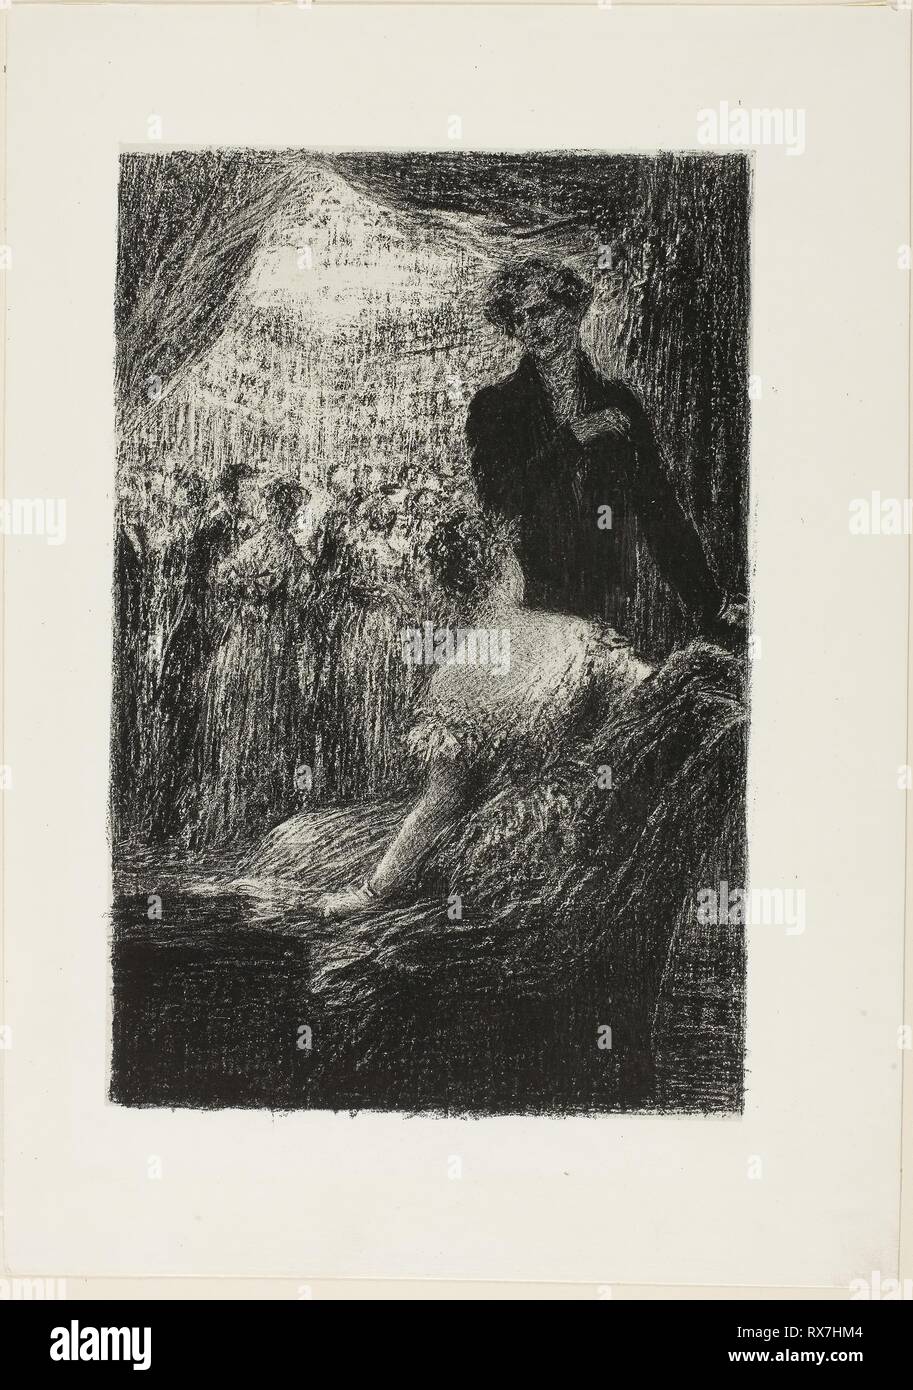 Symphonie Fantastique: A Ball, from Hector Berlioz, sa vie et ses oeuvres. Henri Fantin-Latour; French, 1836-1904. Date: 1888. Dimensions: 234 × 155 mm (image); 307 × 217 mm (sheet). Lithograph in black on off-white China paper, laid down on white wove paper (chine collé). Origin: France. Museum: The Chicago Art Institute. Stock Photo